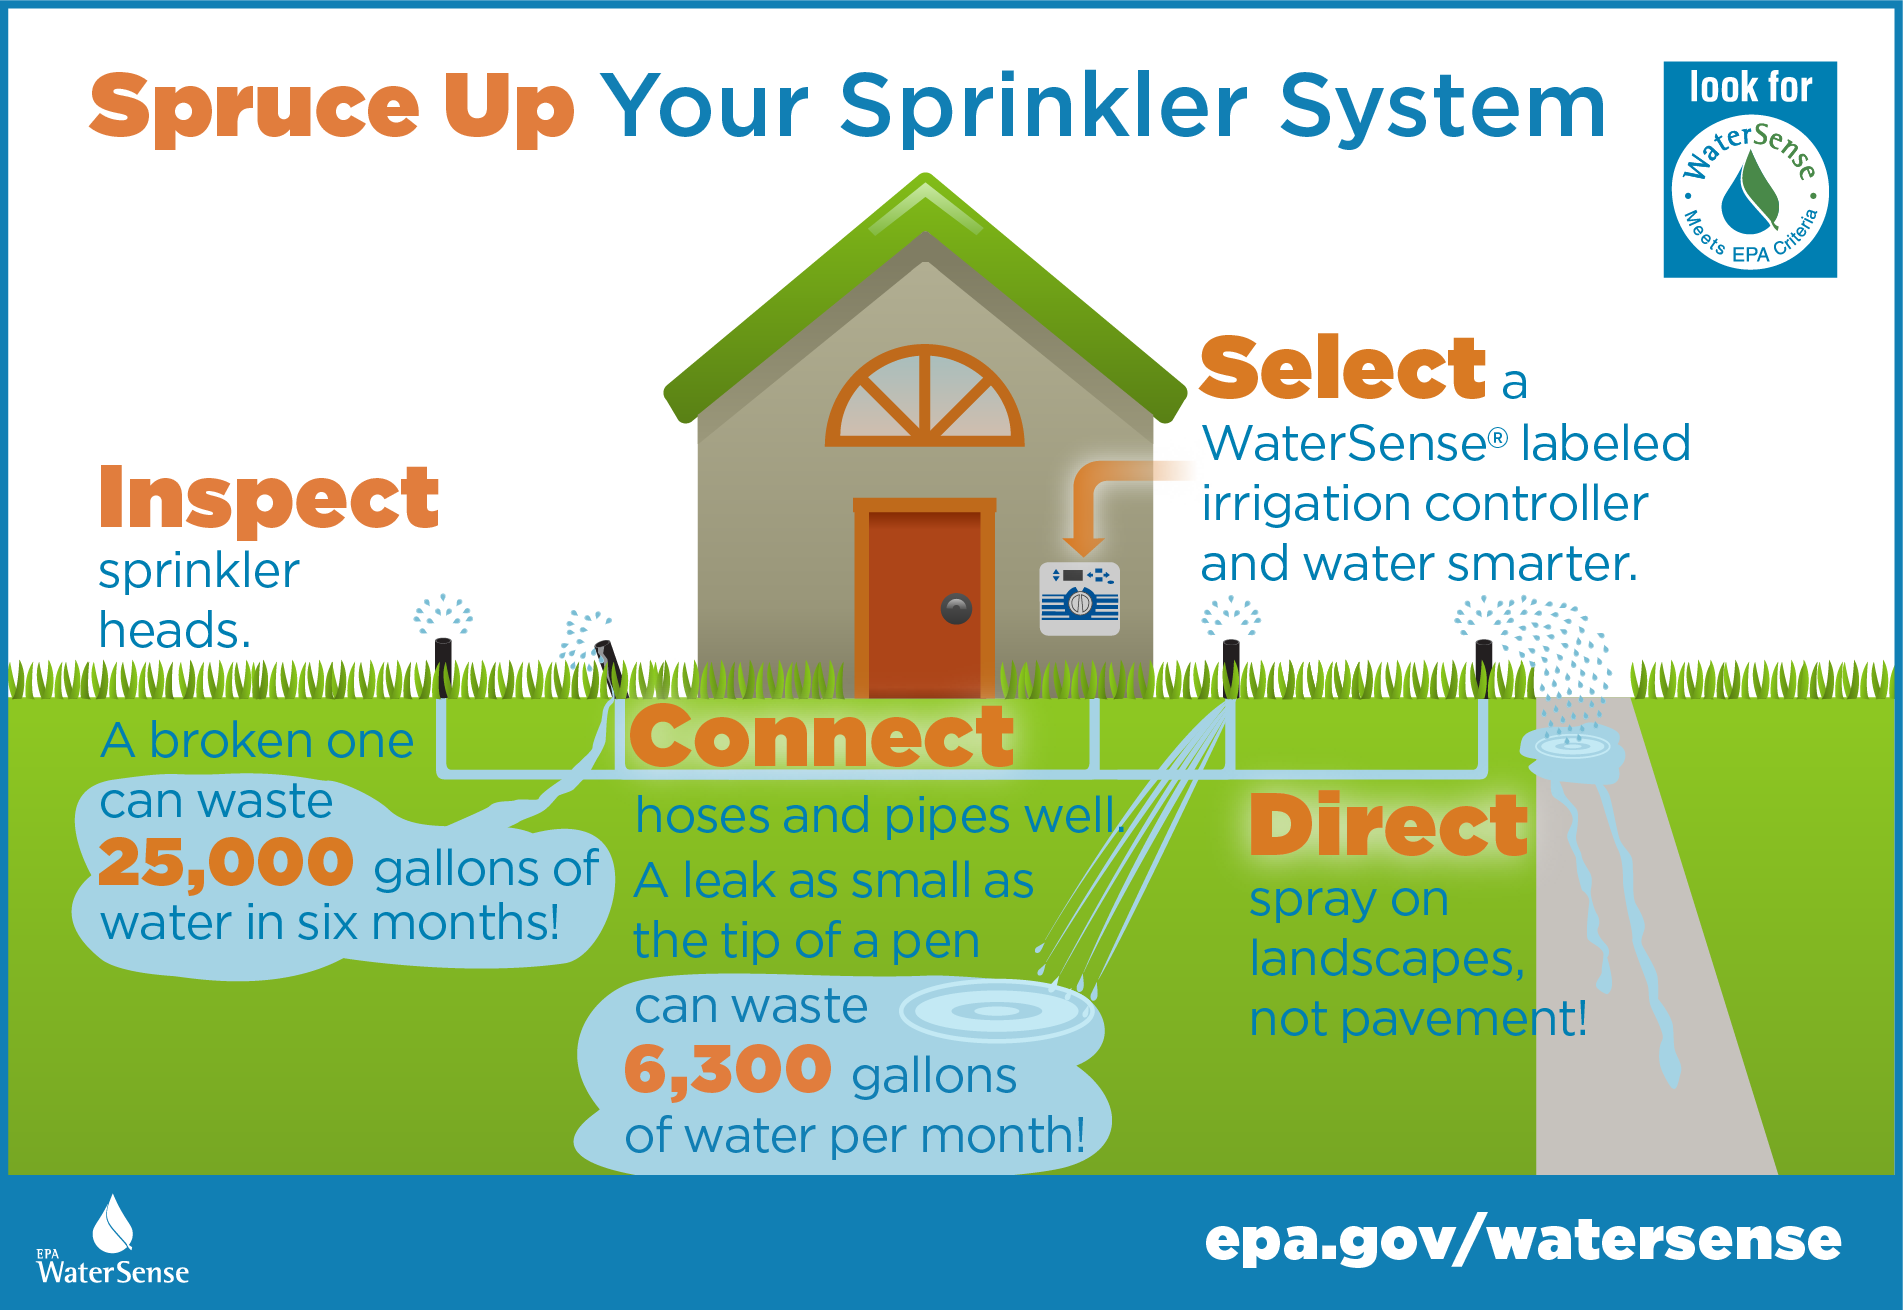 How To Check A Law Sprinkler System (6 Steps)